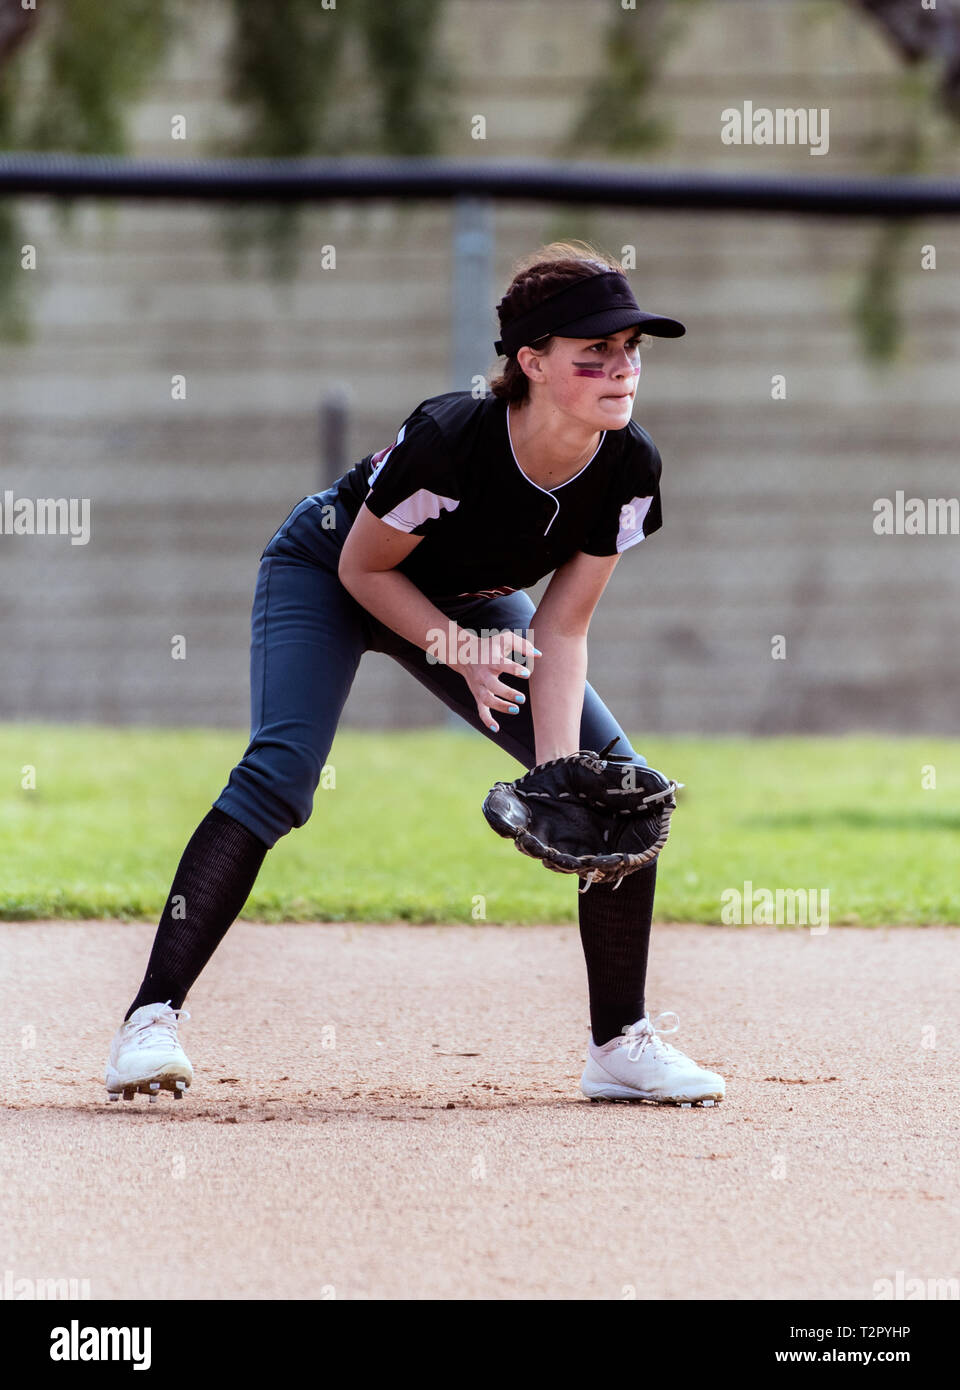 Alert female softball infielder crouched down into ready position and prepared for the ball. Stock Photo